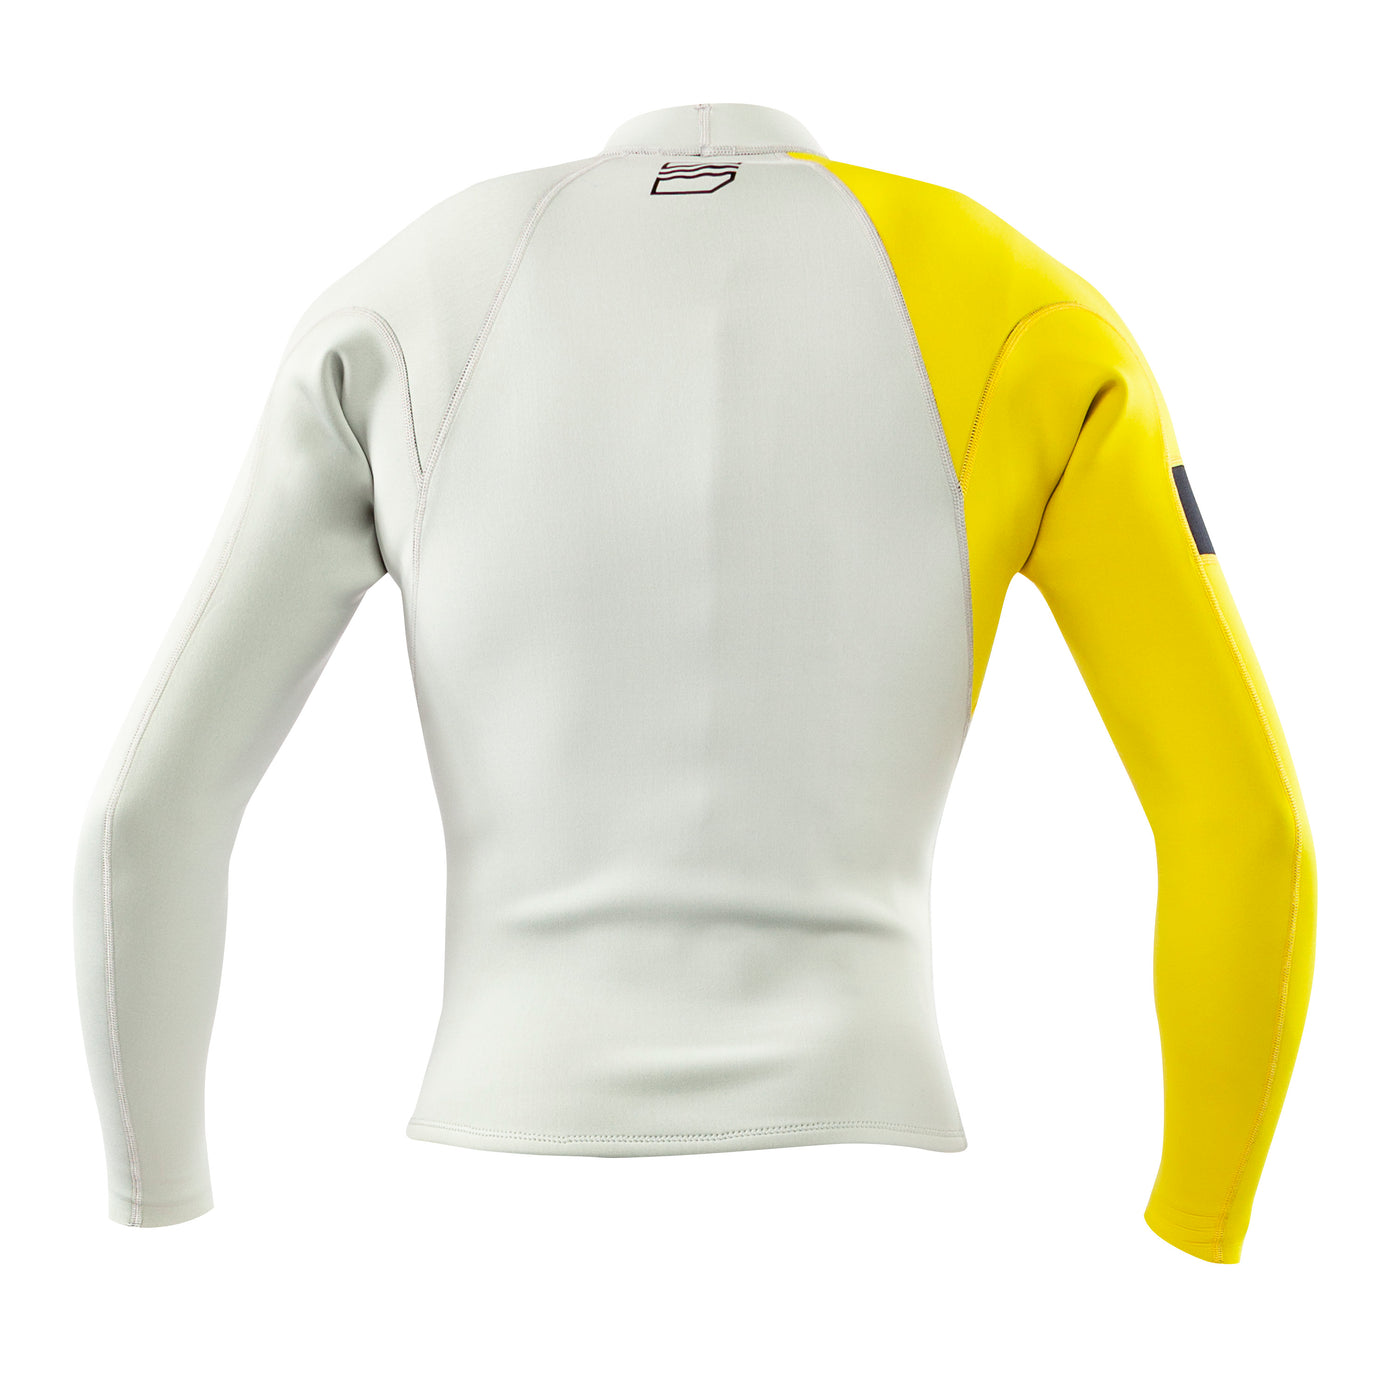 Back view of the Jetpilot F-86 Sabre Jacket Silver Yellow colorway.